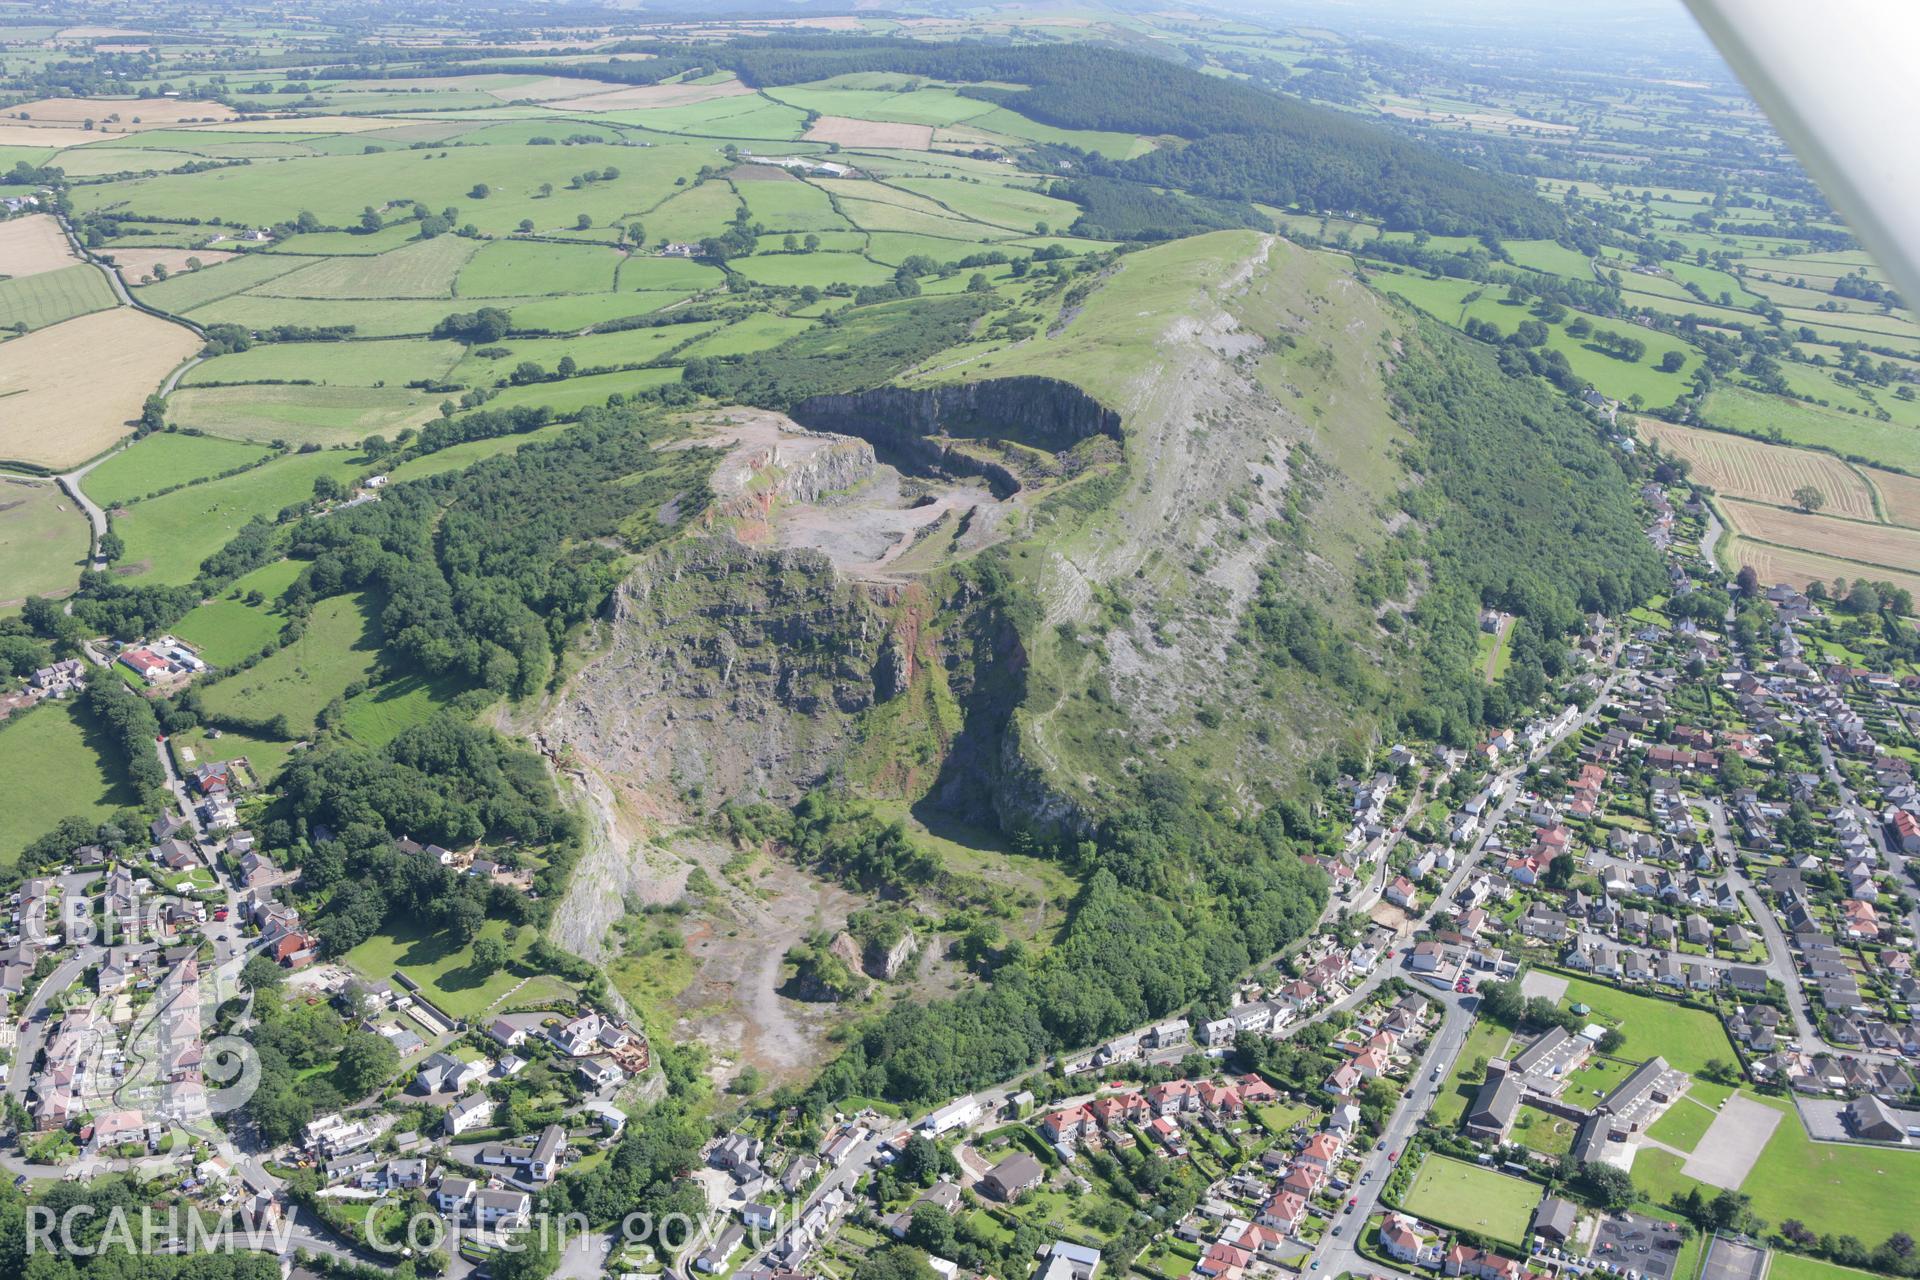 RCAHMW colour oblique aerial photograph of Moel Hiraddug Camp. Taken on 31 July 2007 by Toby Driver